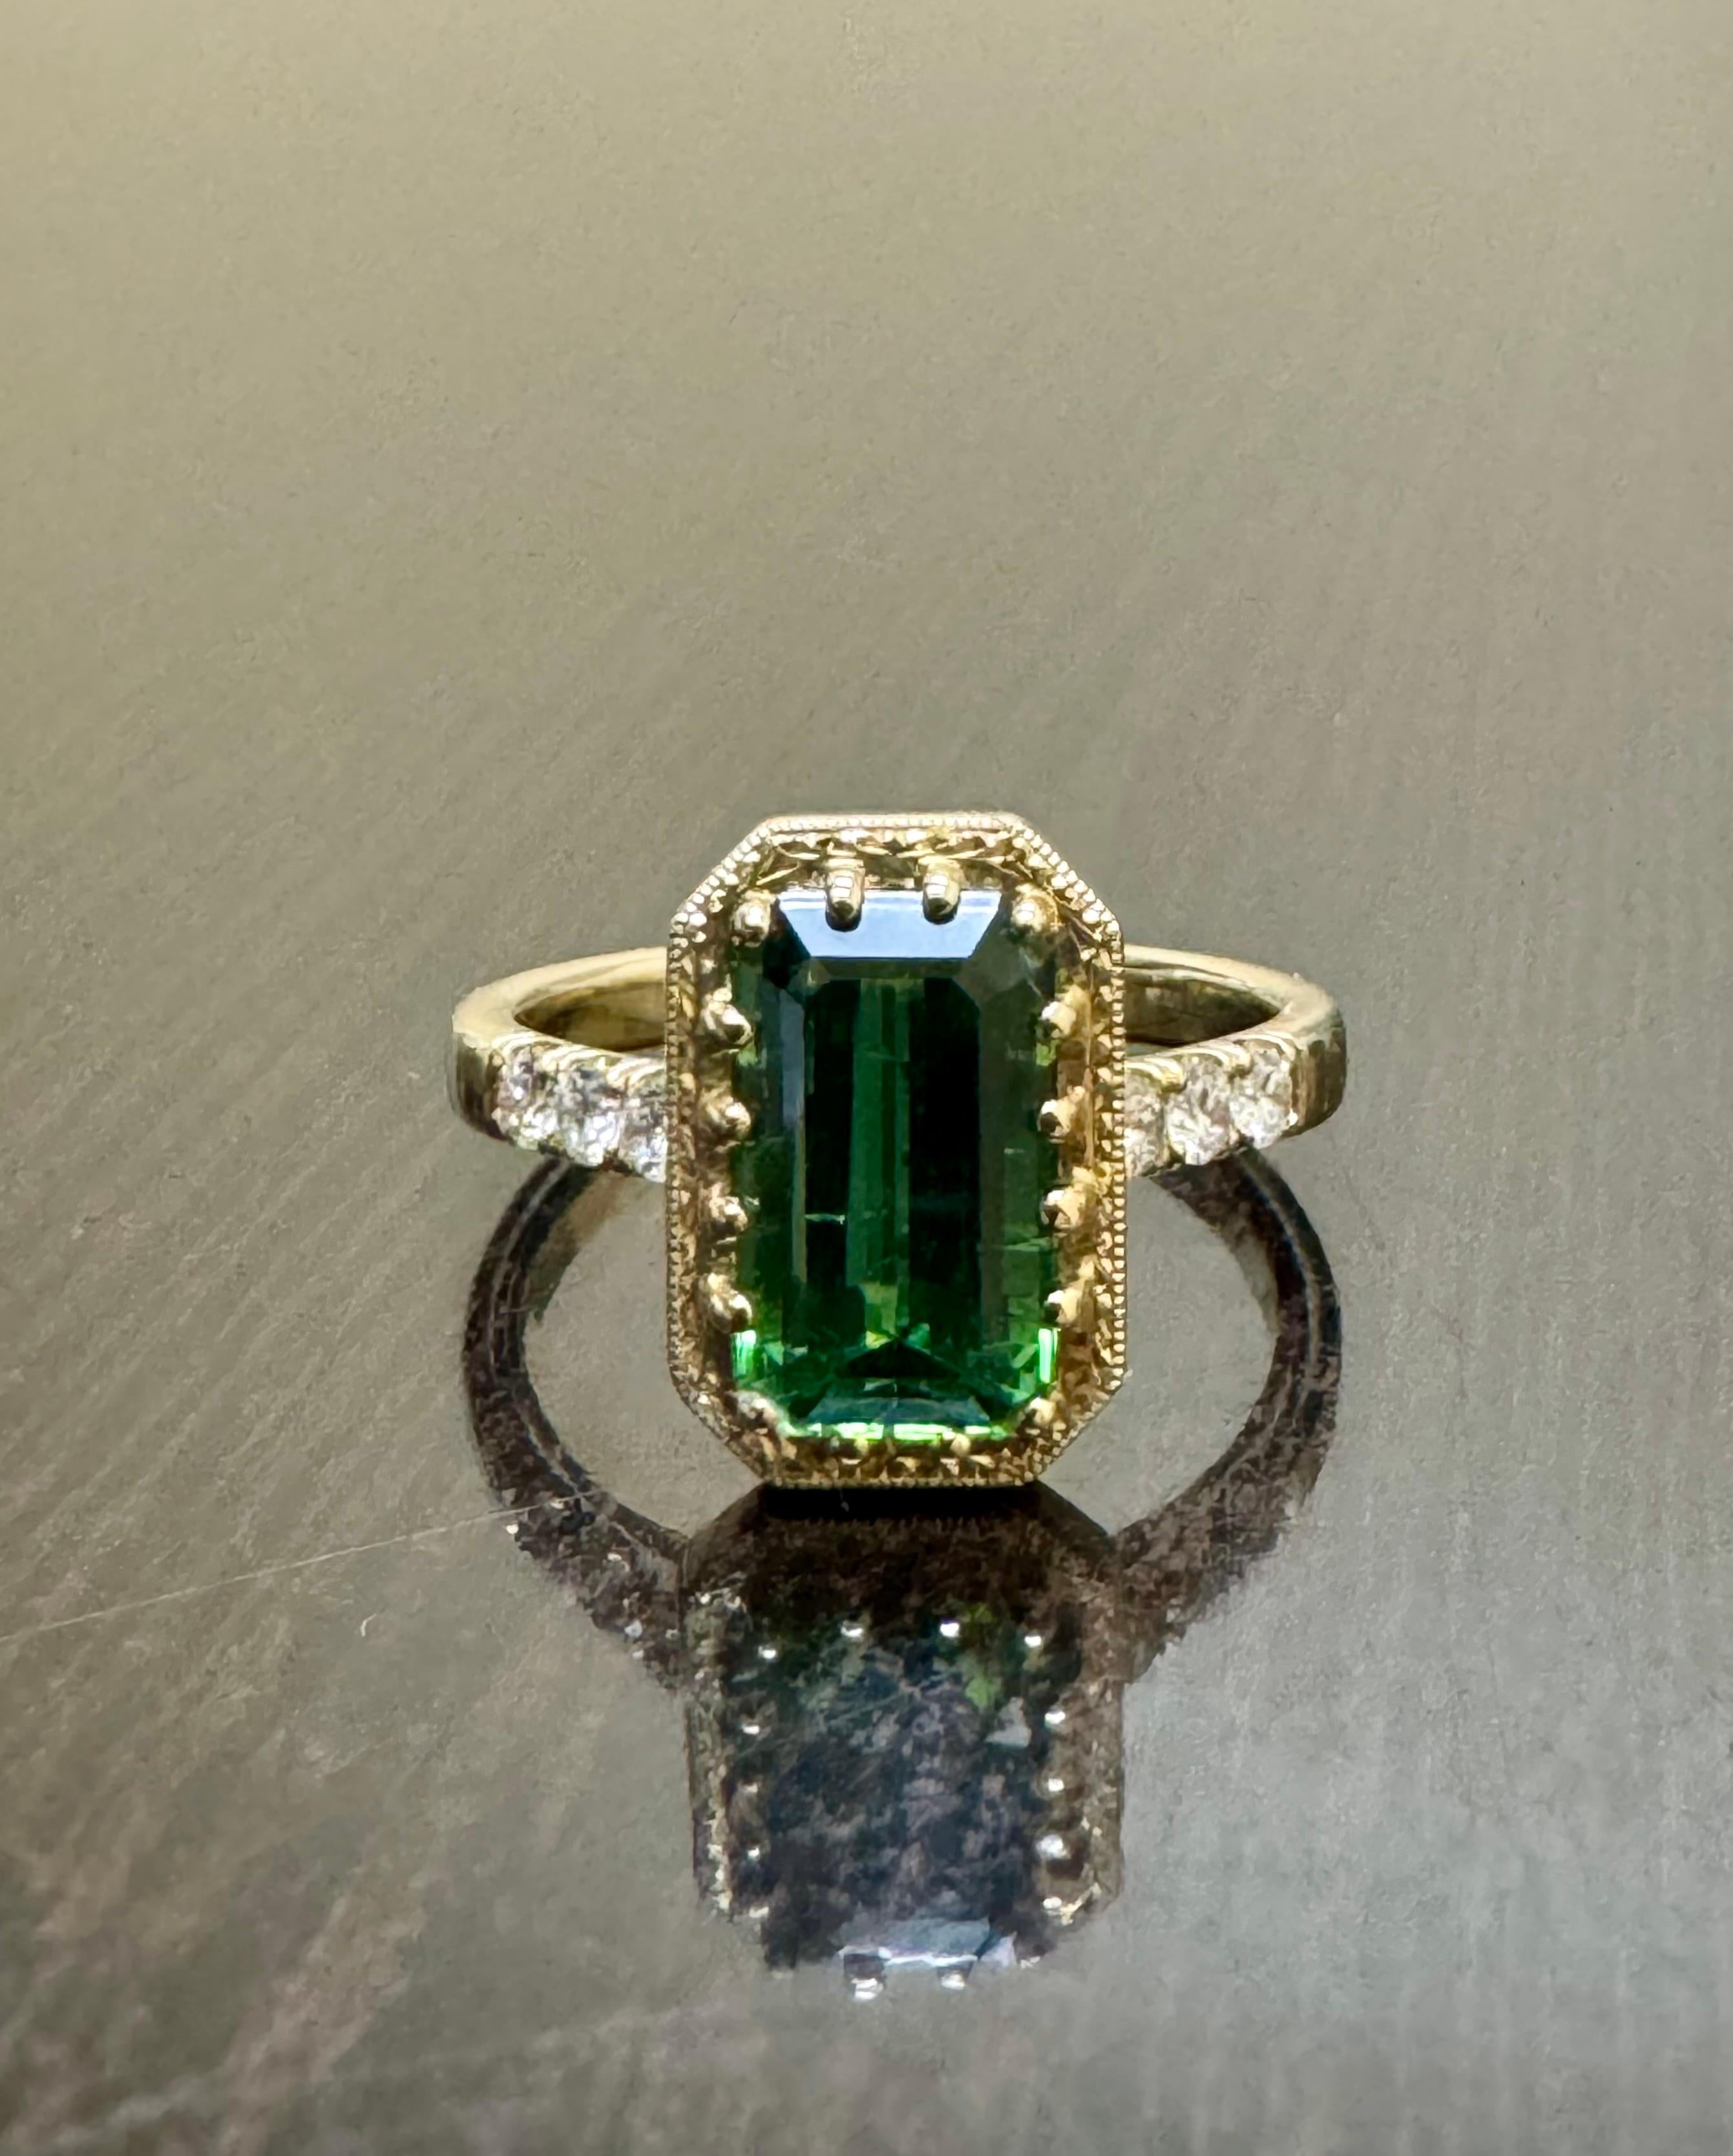 DeKara Designs Collection

Our latest design! An Elegant and Lustrous Elongated Emerald Cut Teal Tourmaline Handmade in 14K Yellow Gold.

Metal- 14K Yellow Gold, .583.

Stones- Genuine Emerald Cut Blue Green Tourmaline 2.44 Carats, 6 Round Diamonds